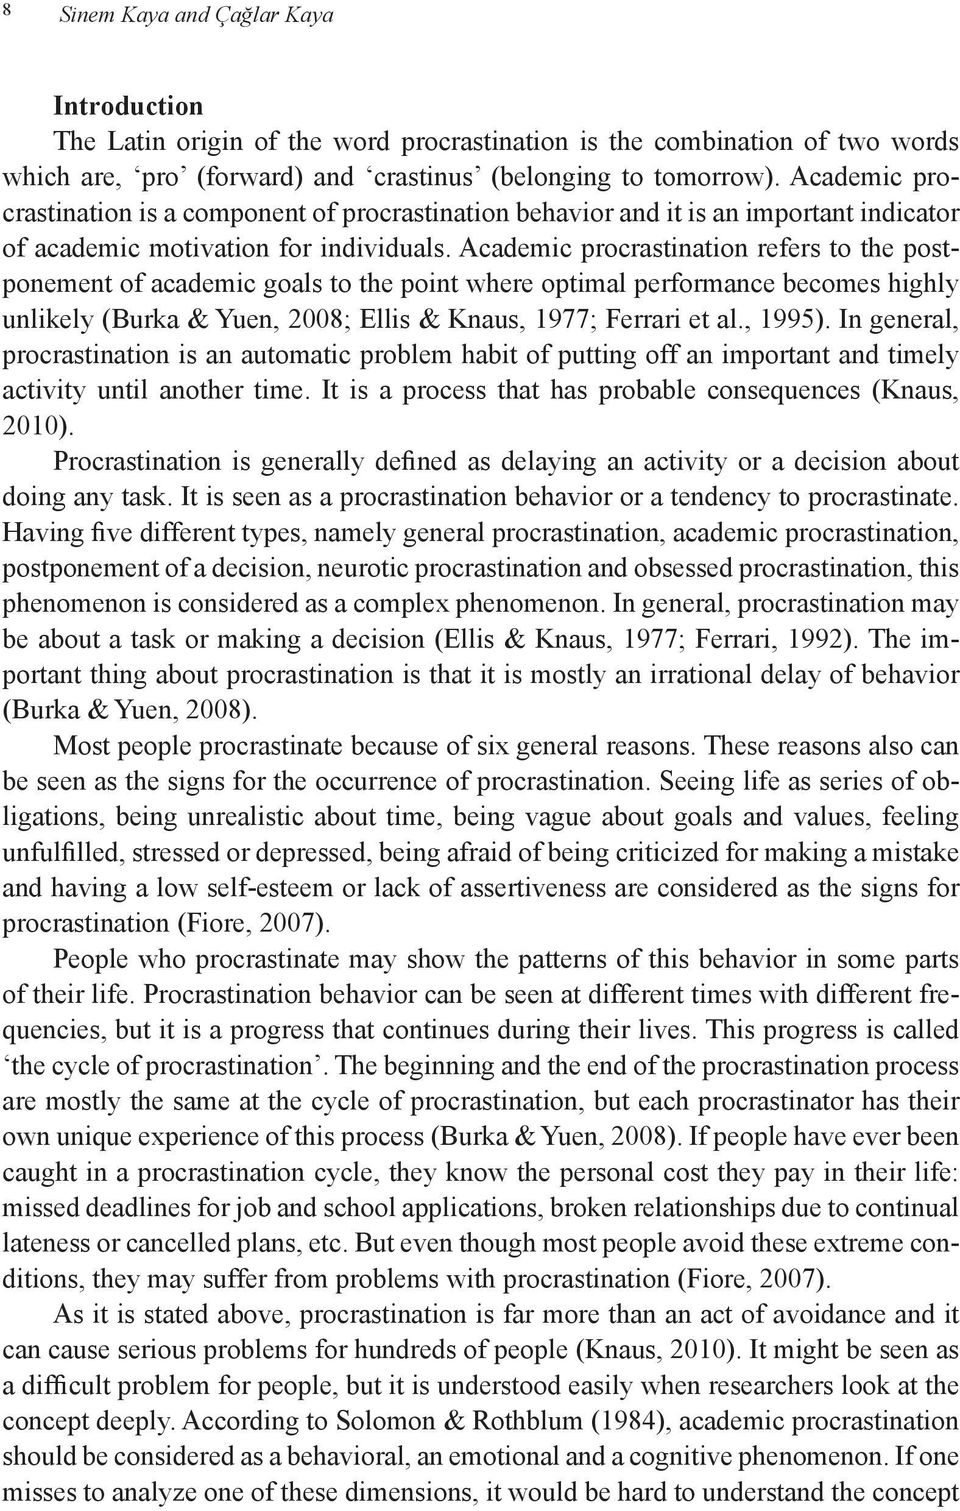 Academic procrastination refers to the postponement of academic goals to the point where optimal performance becomes highly unlikely (Burka & Yuen, 2008; Ellis & Knaus, 1977; Ferrari et al., 1995).